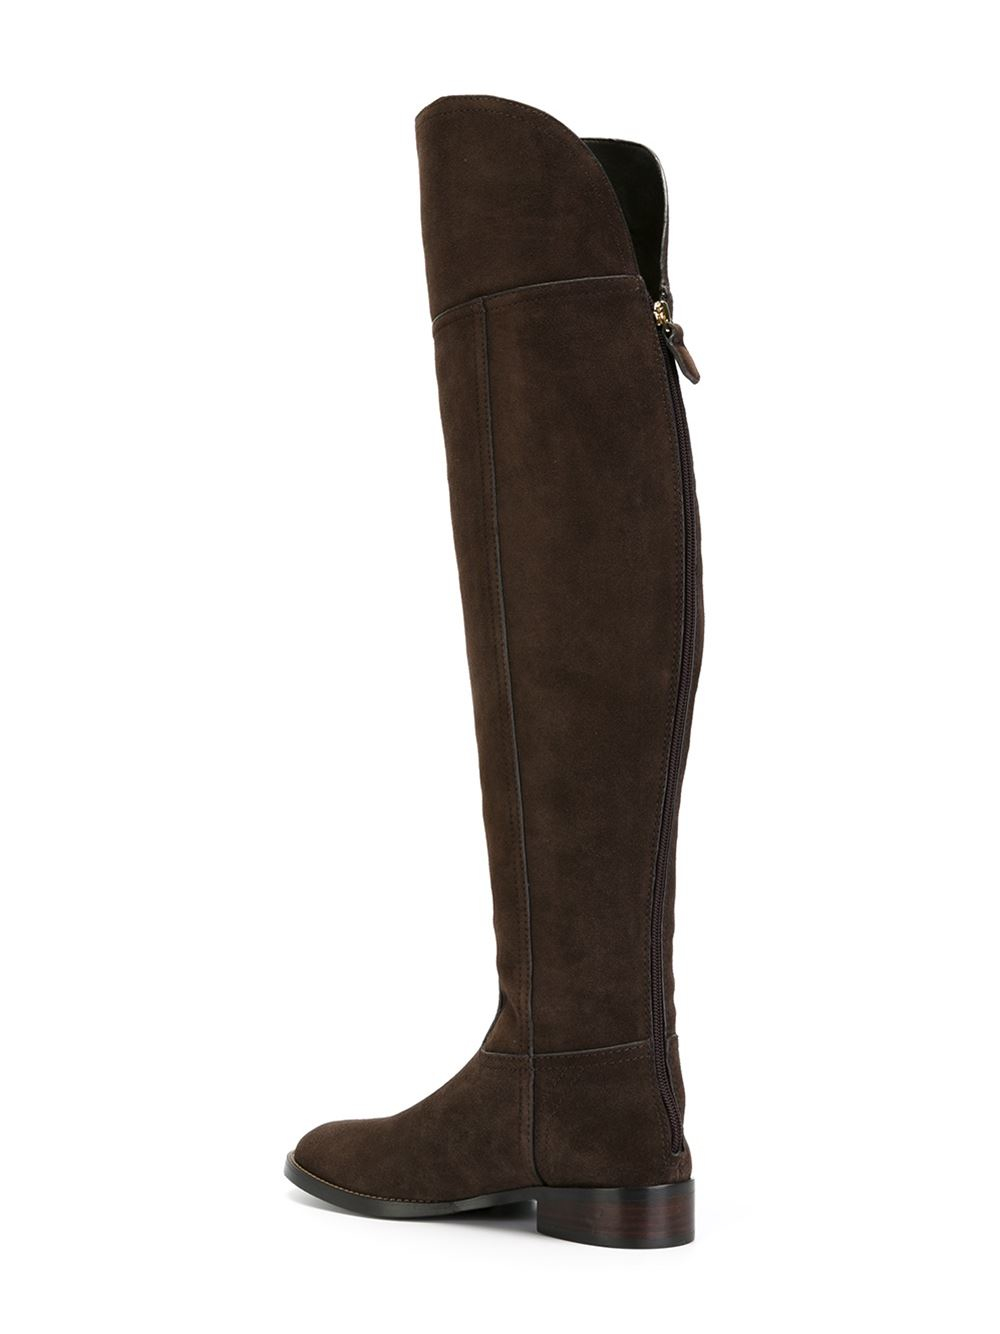 Tory Burch Thigh High Boots in Brown | Lyst